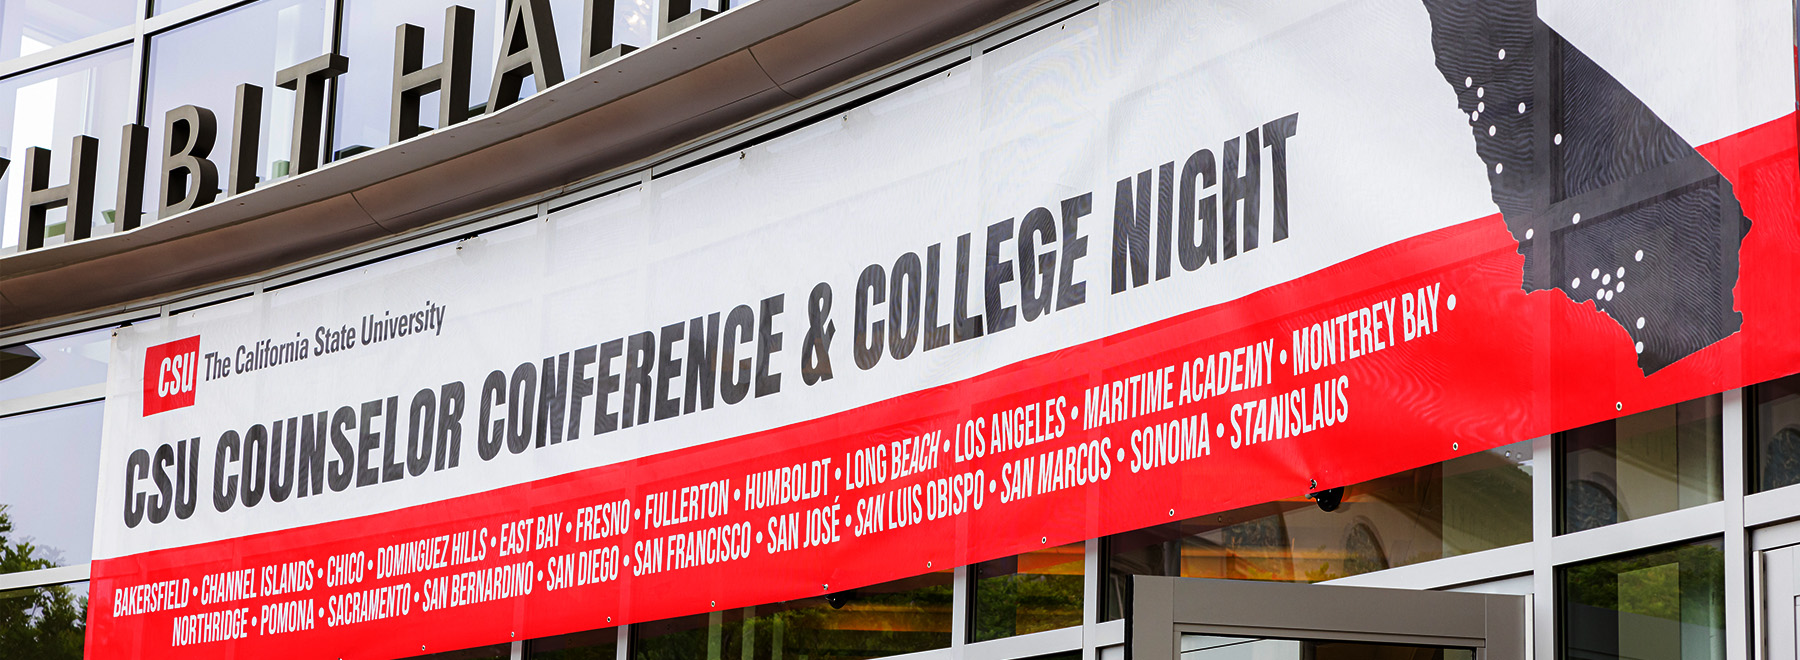 CSU Counselor Conference & College Night Banner